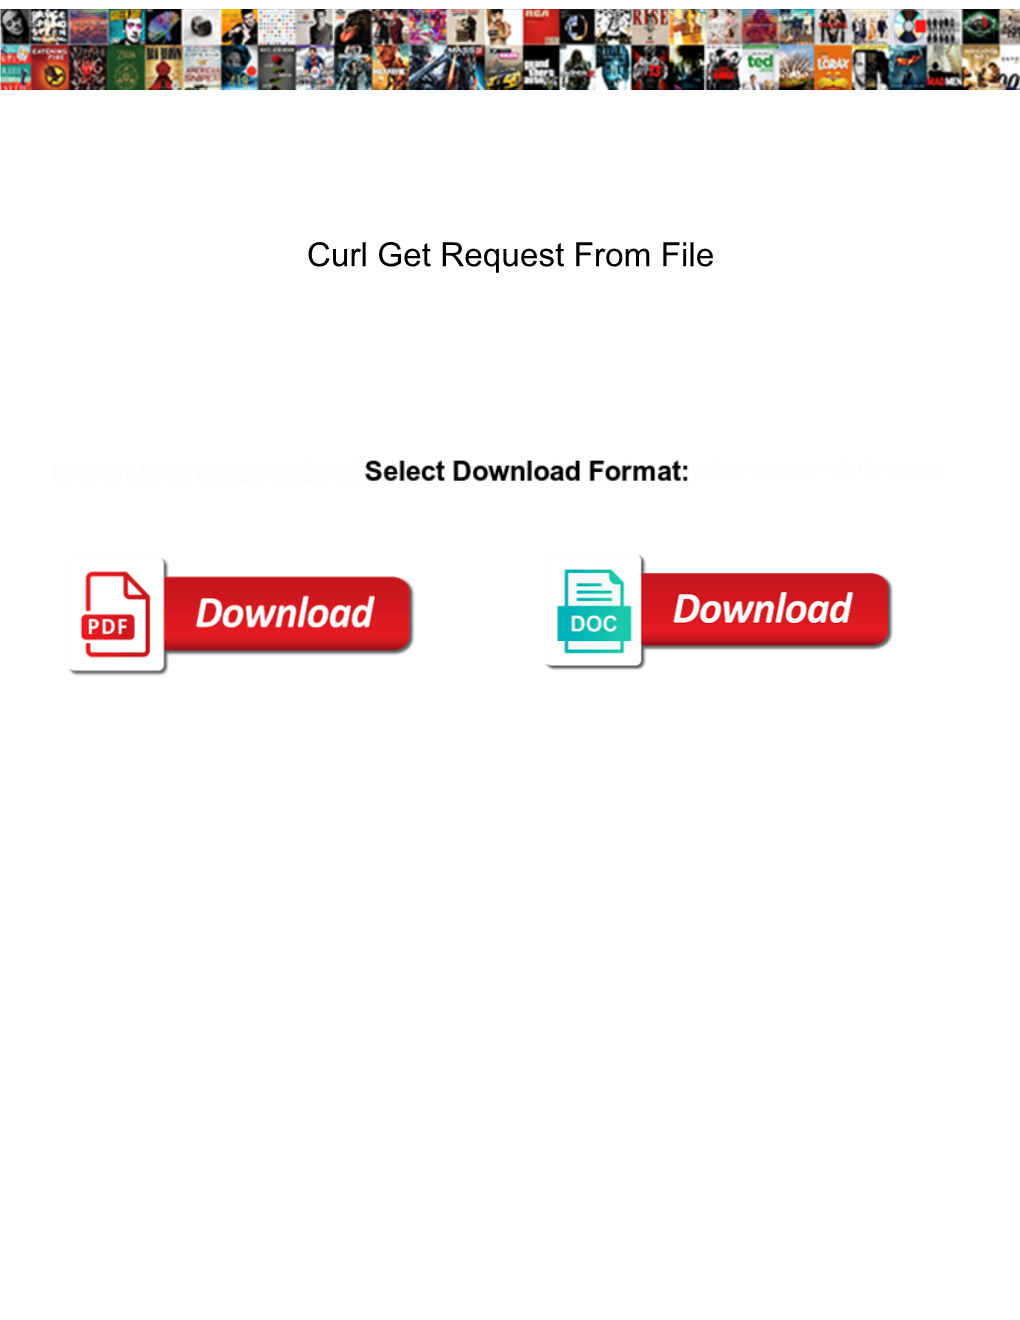 Curl Get Request from File